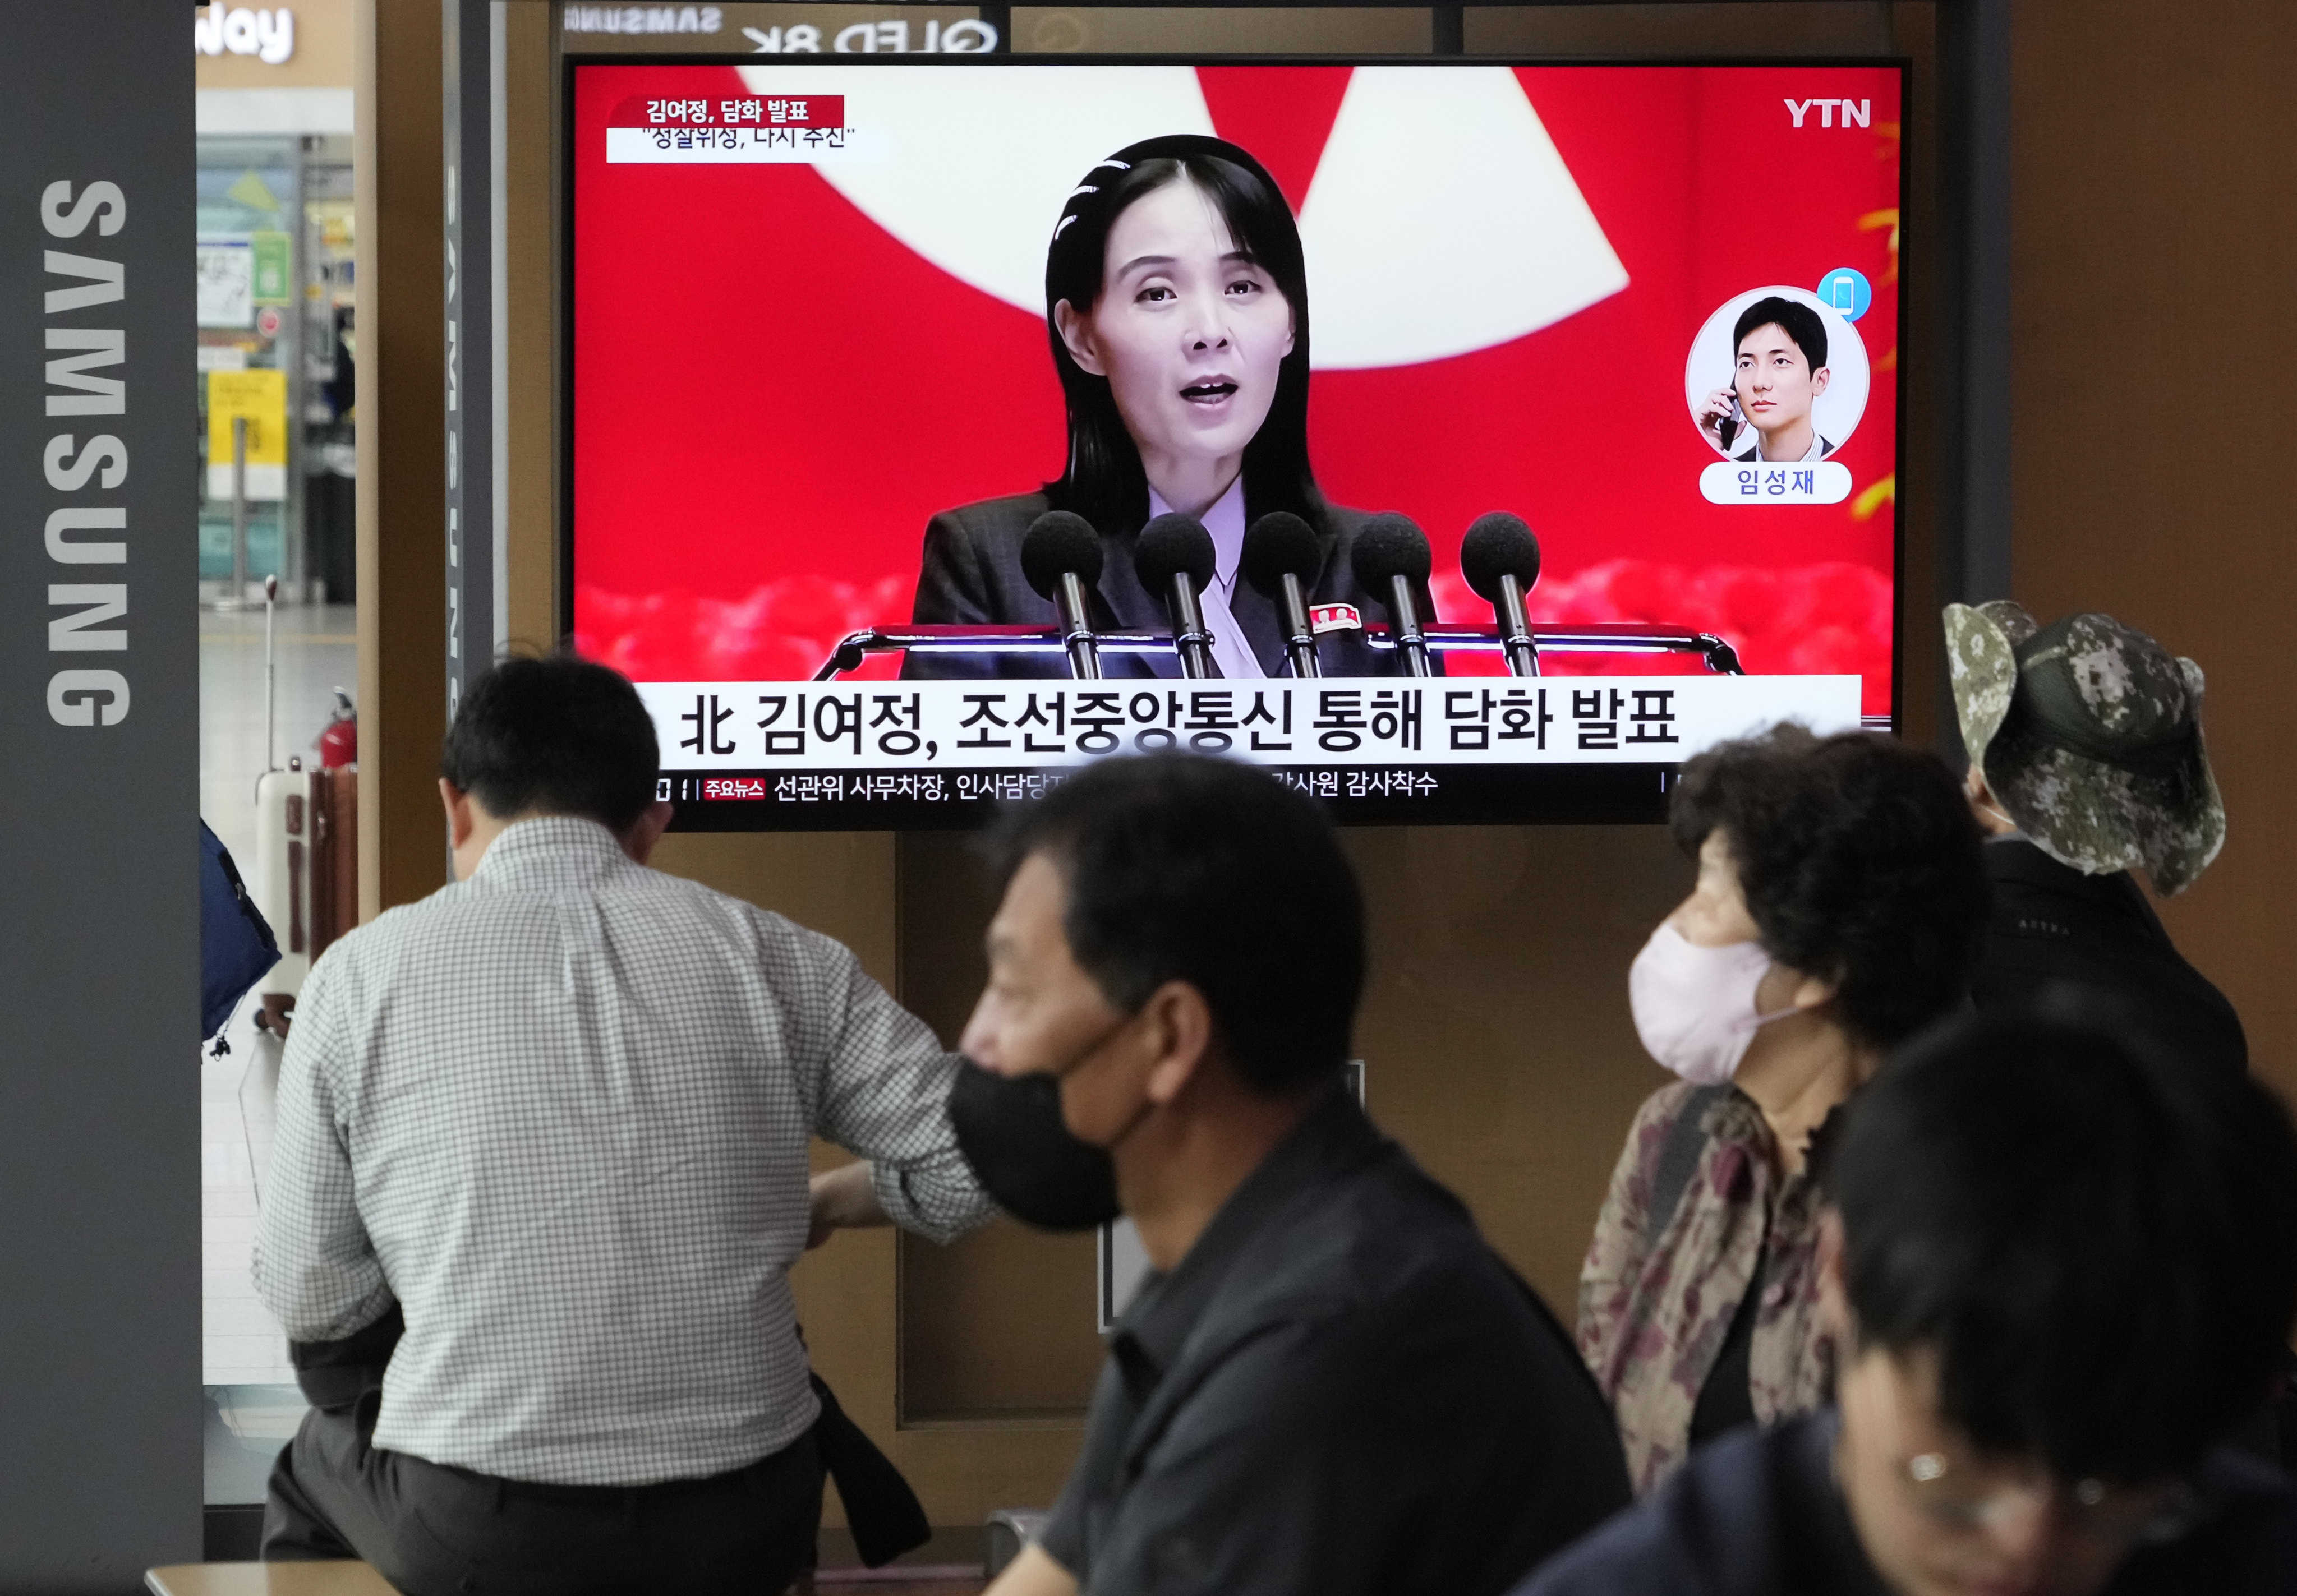 A TV screen shows a file image of Kim Yo-jong, the sister of North Korean leader Kim Jong-un, during a news programme at the Seoul Railway Station. Kim Yo-jong has said she saw a positive tone in comments from Prime Minister Fumio Kishida, who is seeking a summit. Photo: AP